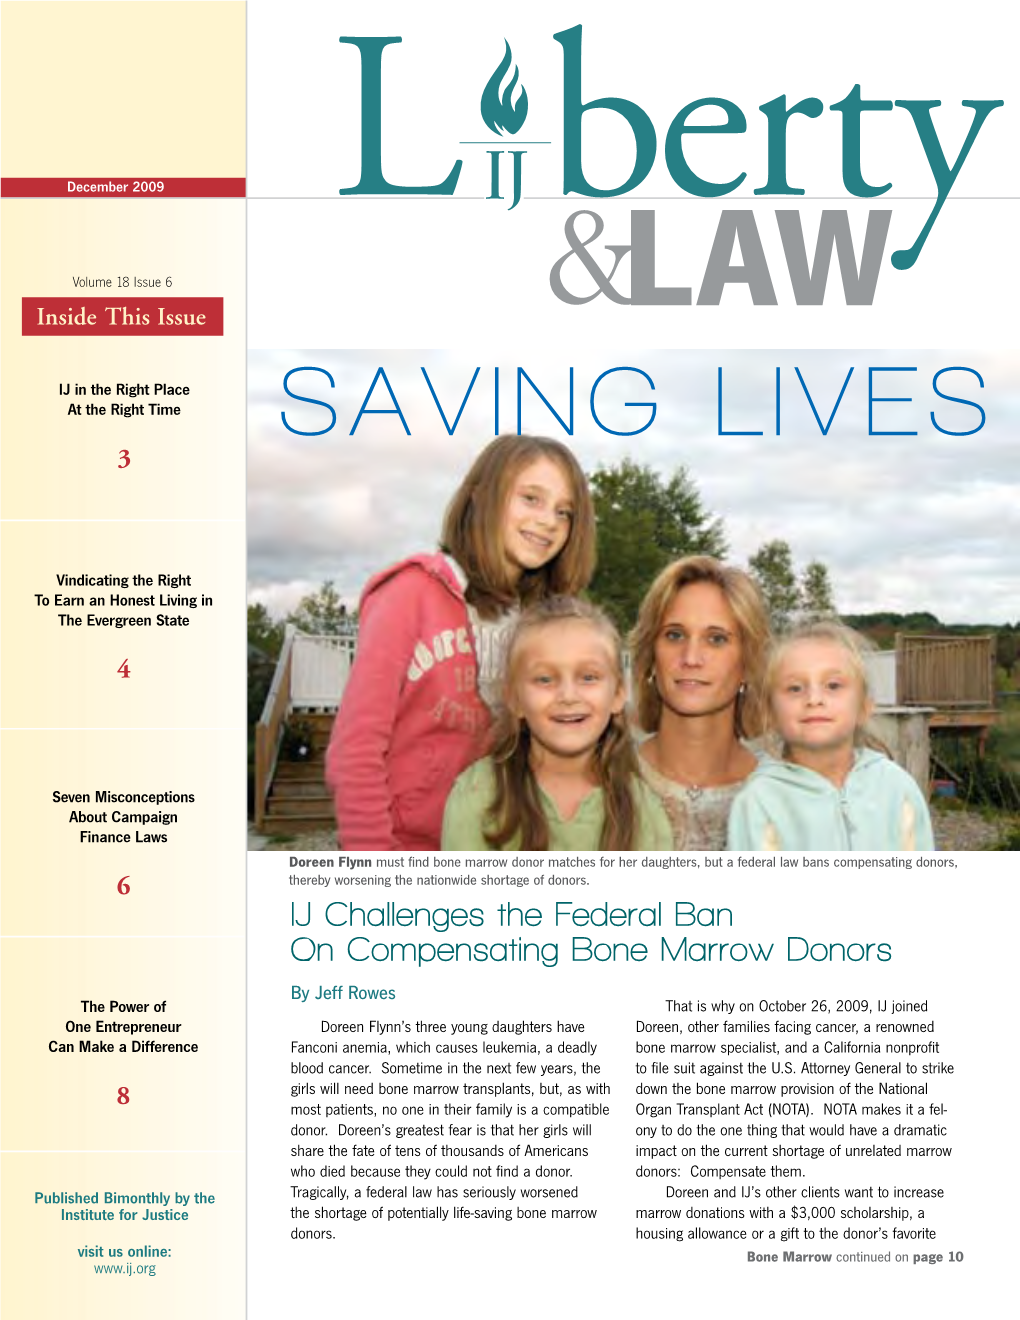 Saving Lives IJ Challenges the Federal